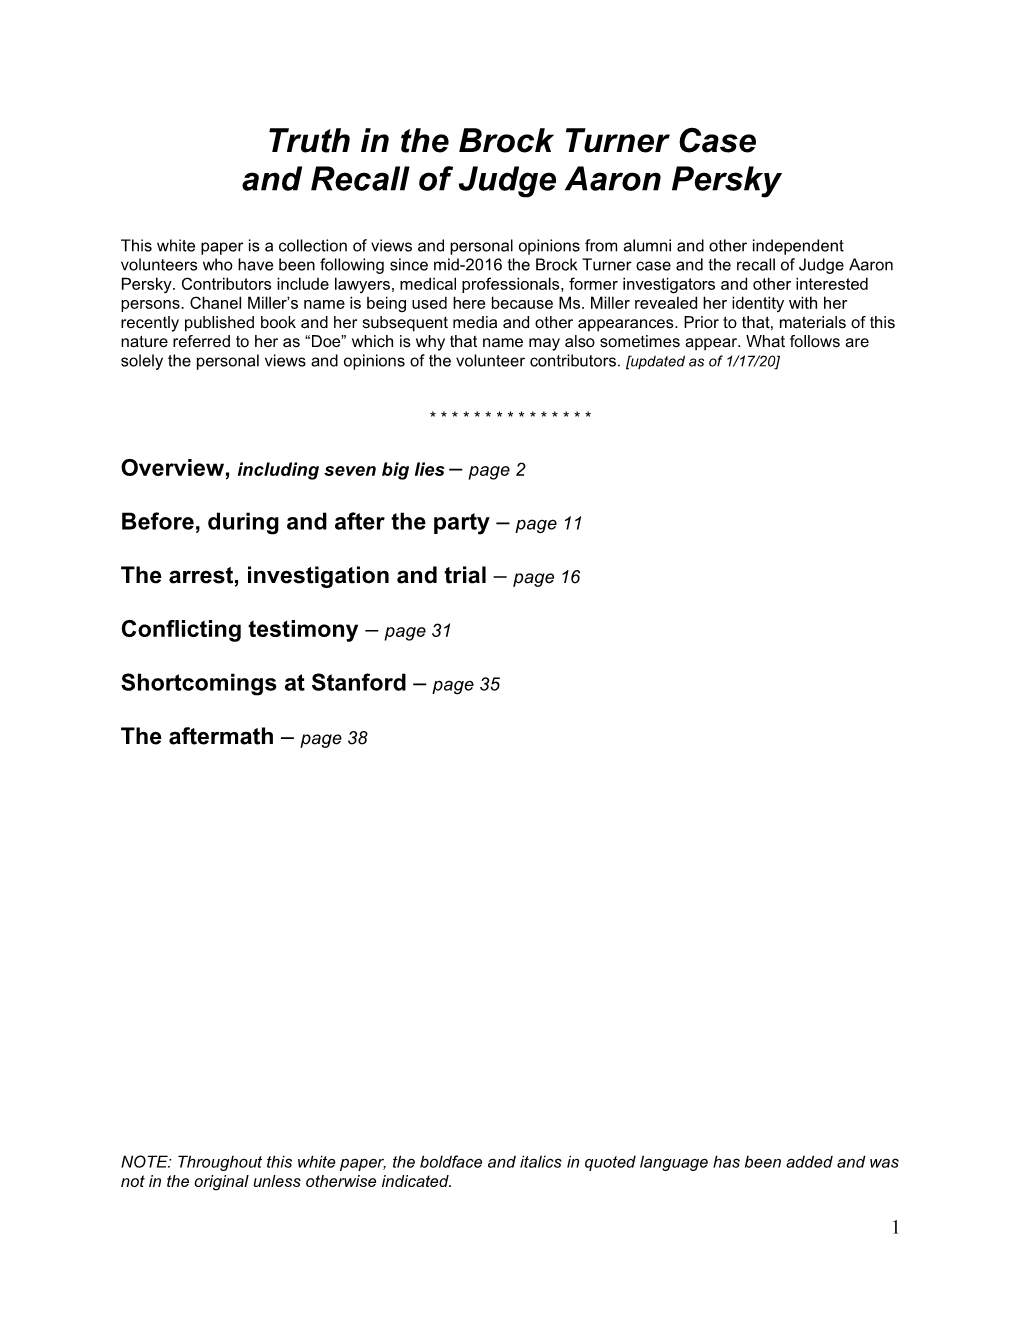 Truth in the Brock Turner Case and Recall of Judge Aaron Persky